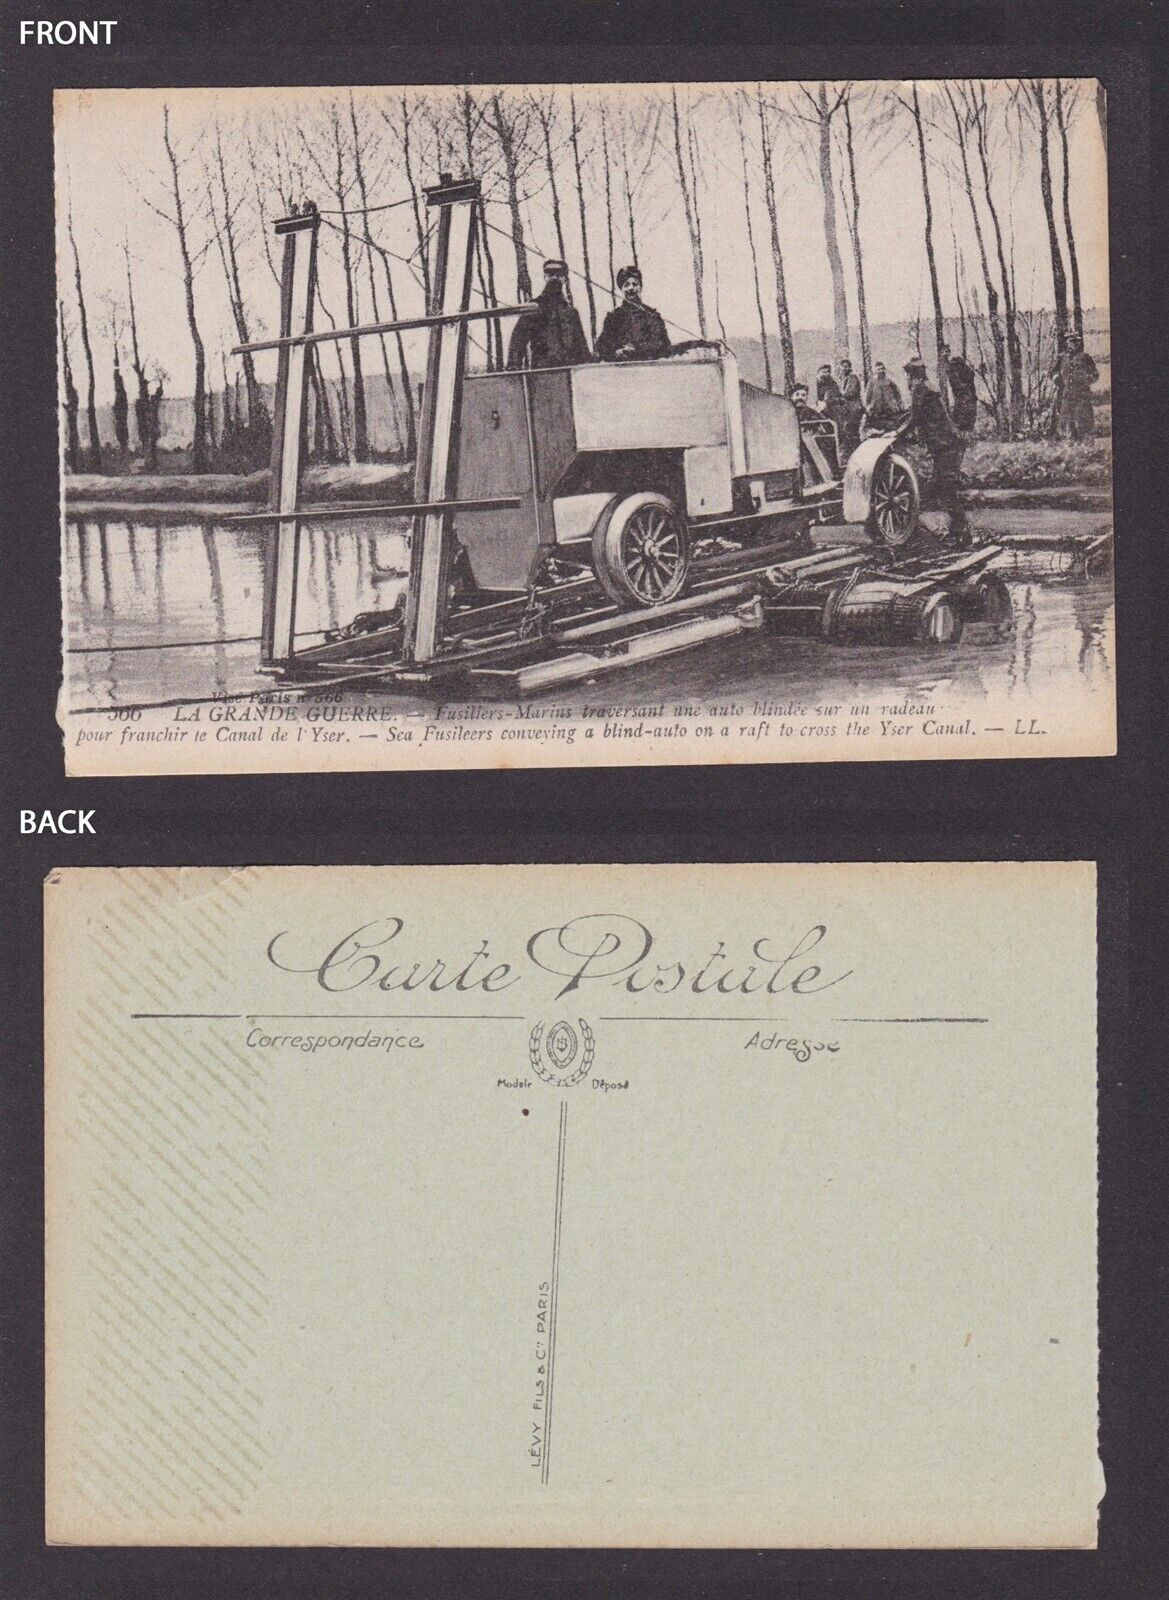 FRANCE, Vintage postcard, Sea Fusileers conveying a blind-auto on a raft, WWI